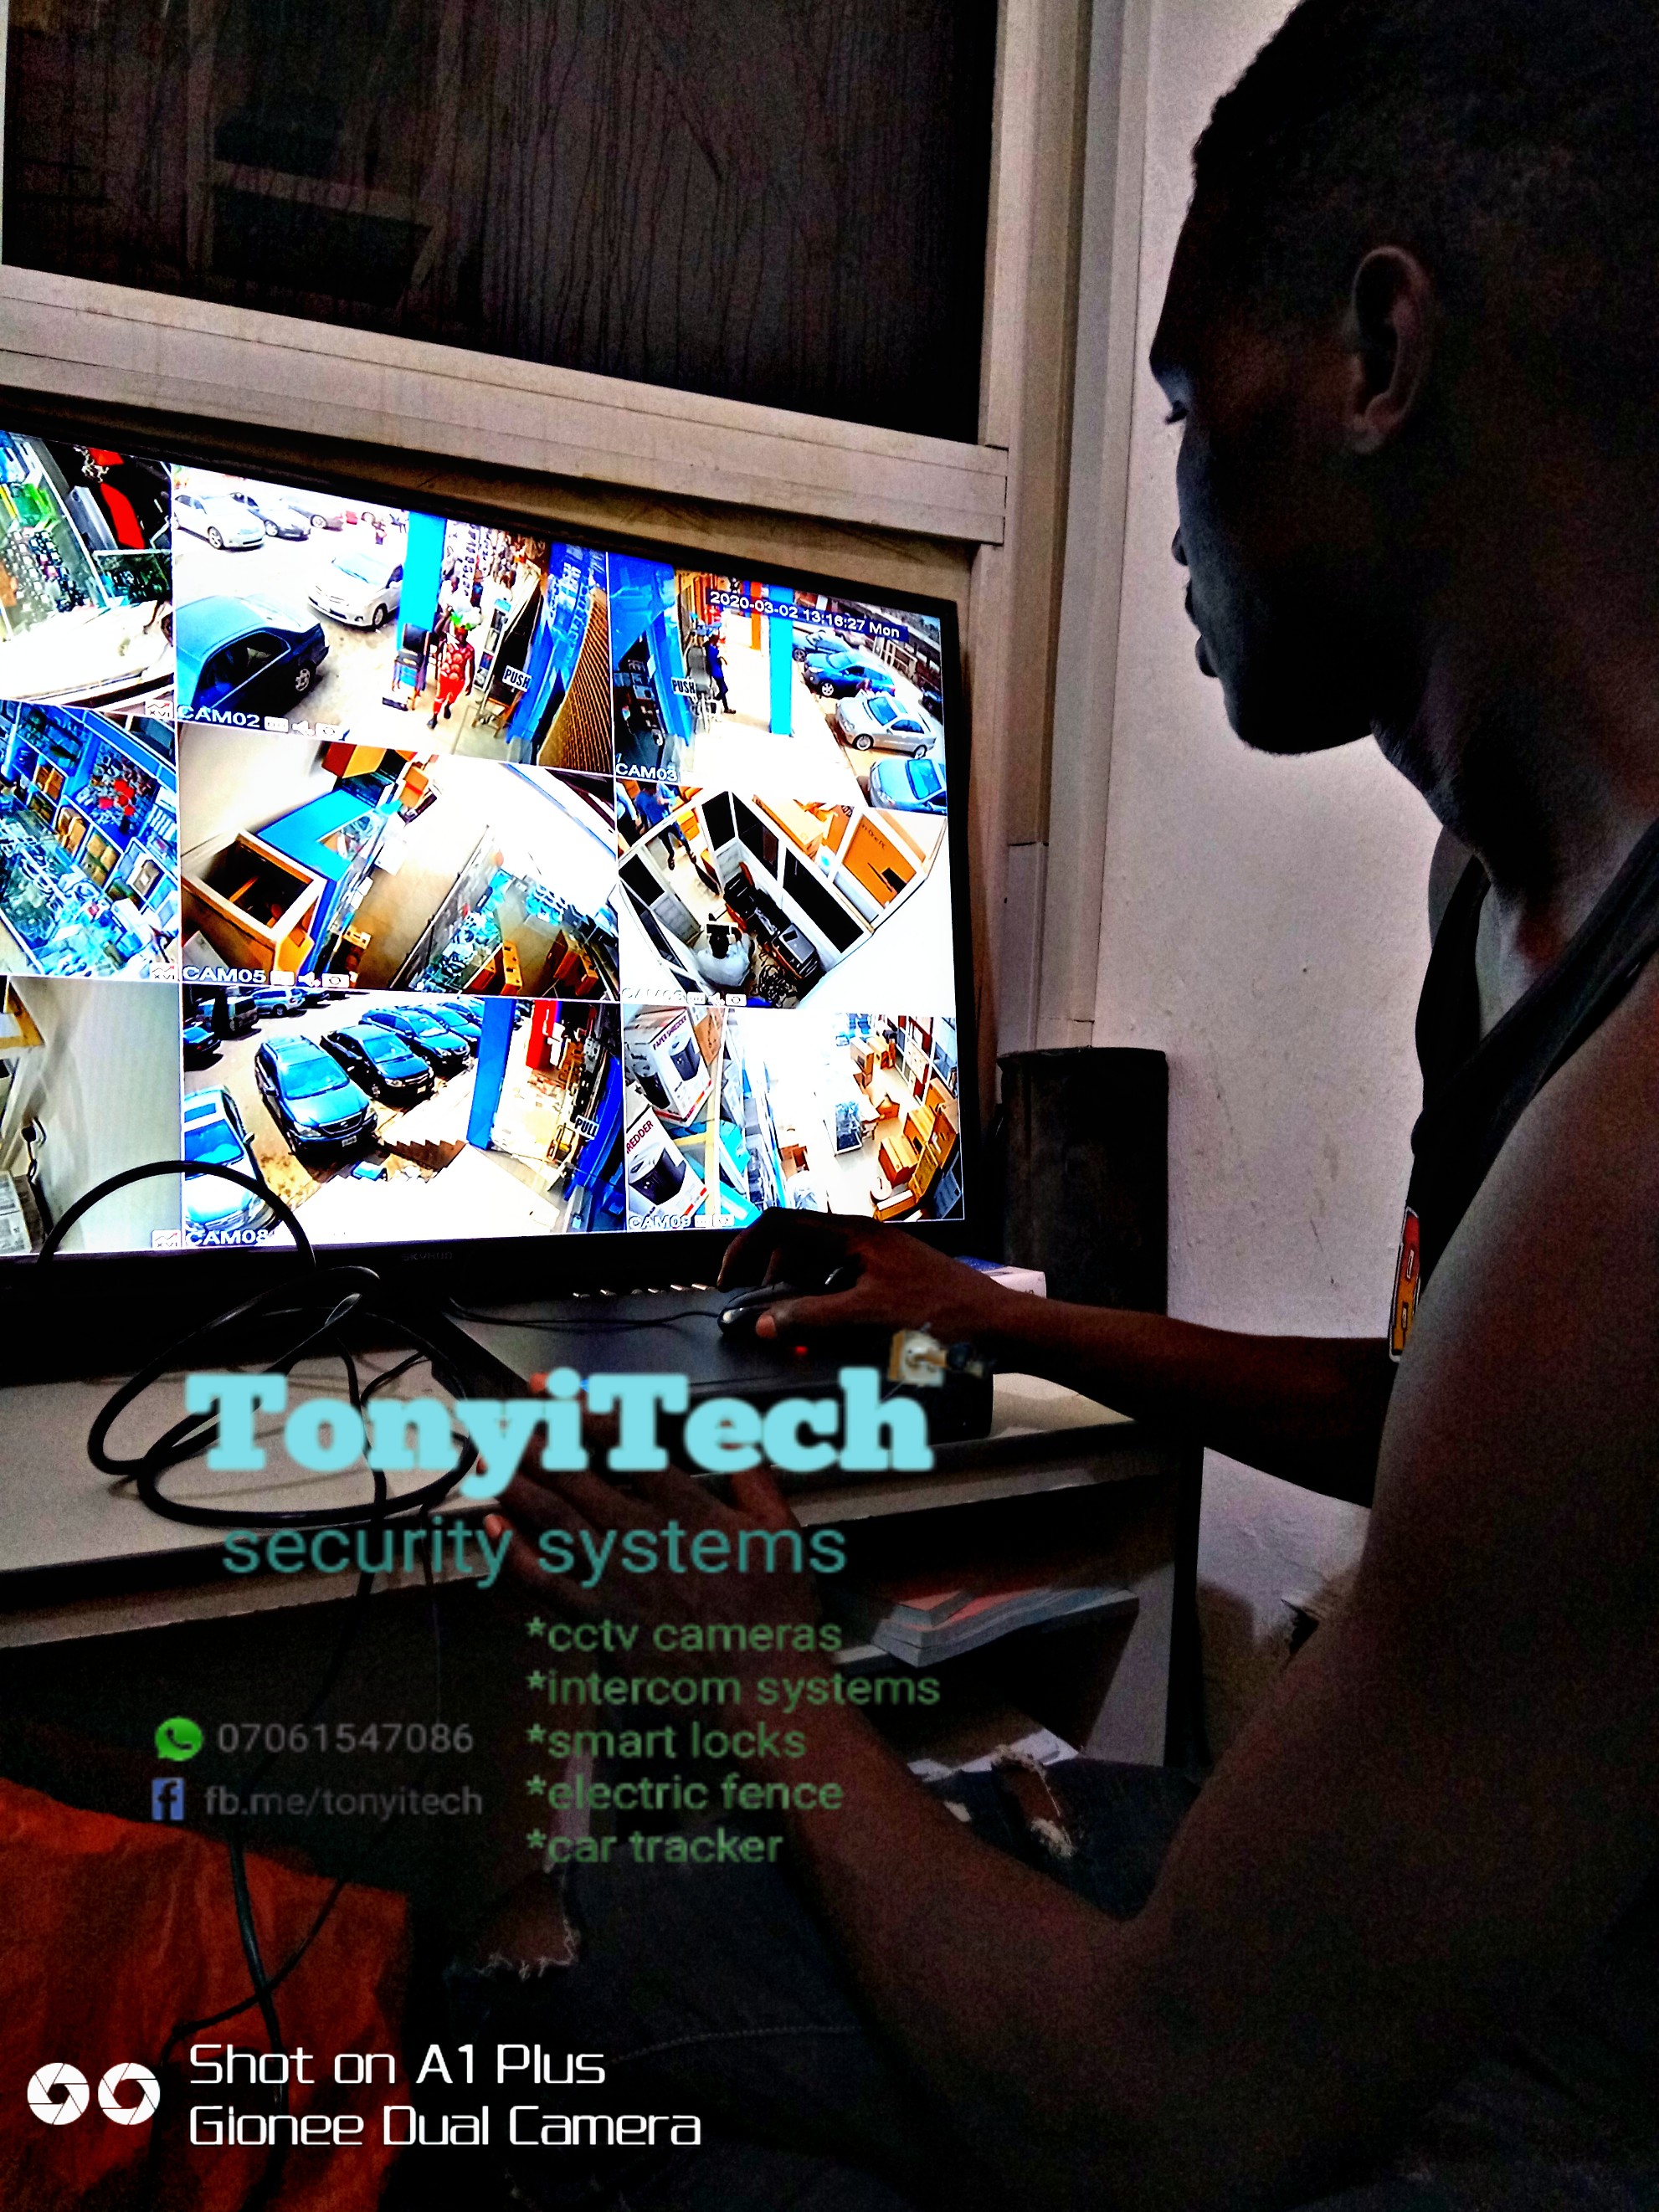 TonyiTech Security systems. provider